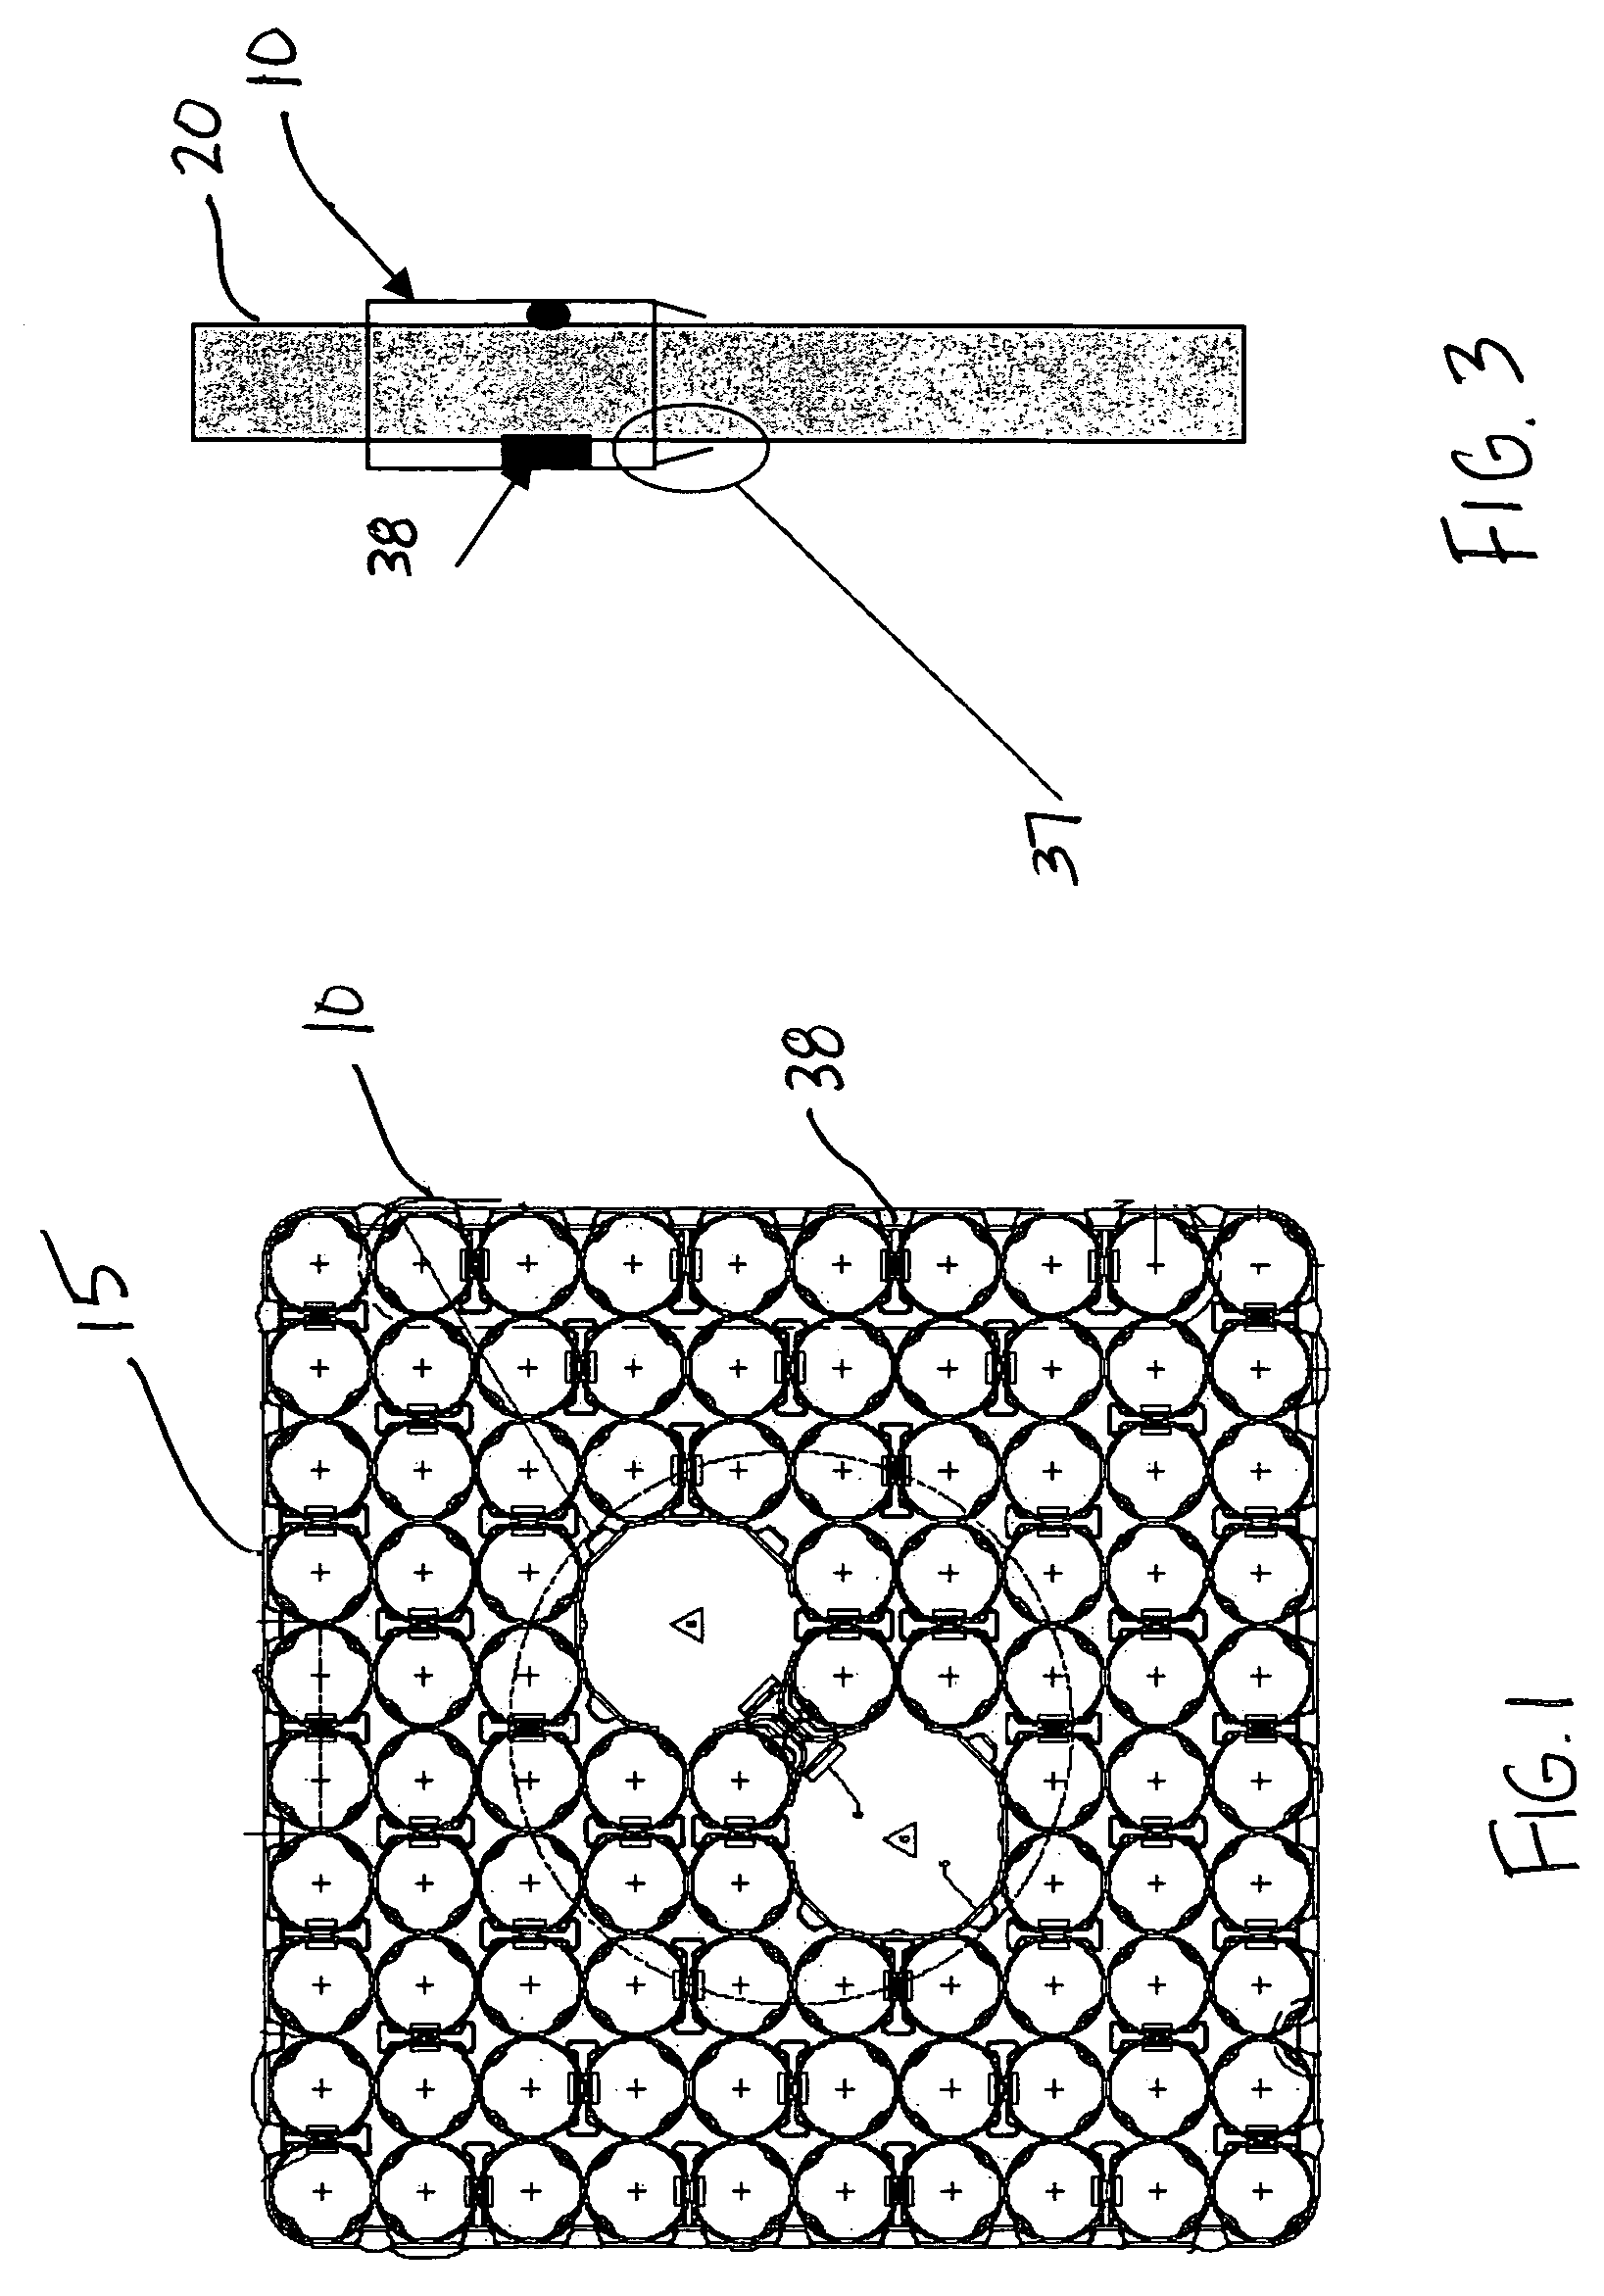 Nuclear fuel spacer assembly with debris guide